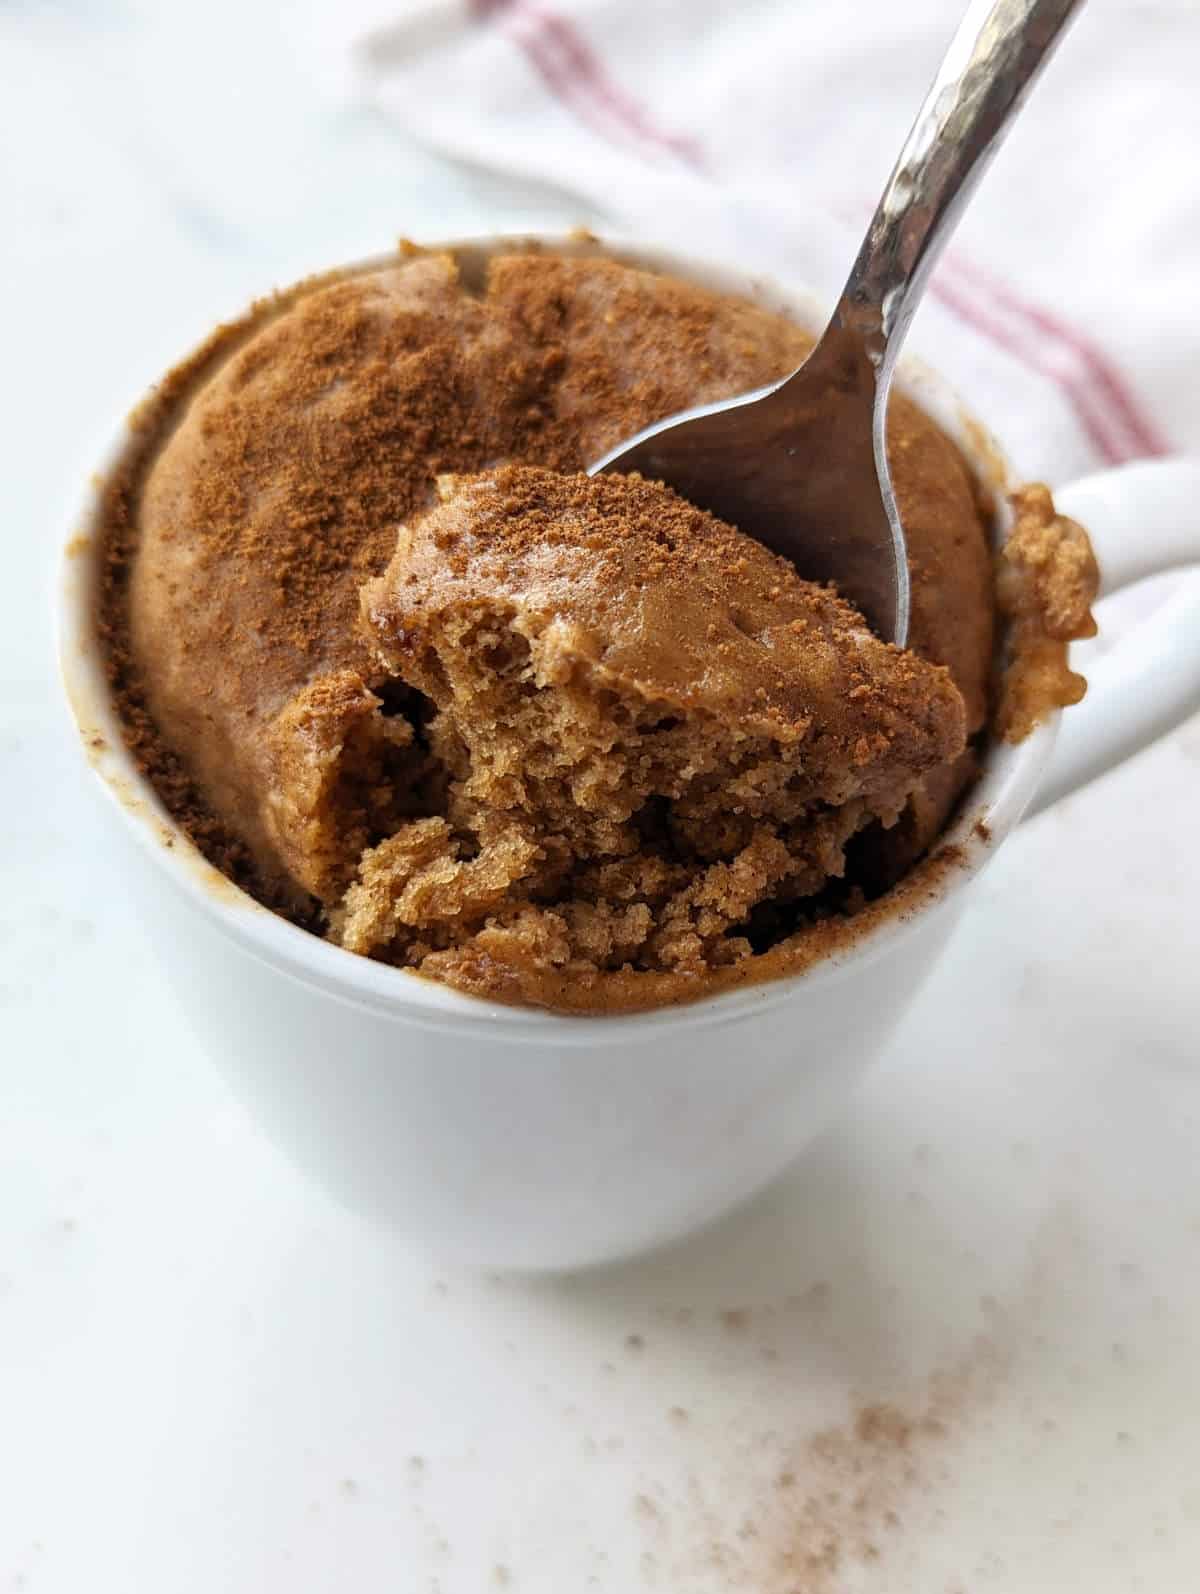 A spoon digging into the snickerdoodle mug cake, showing the fluffy interior.